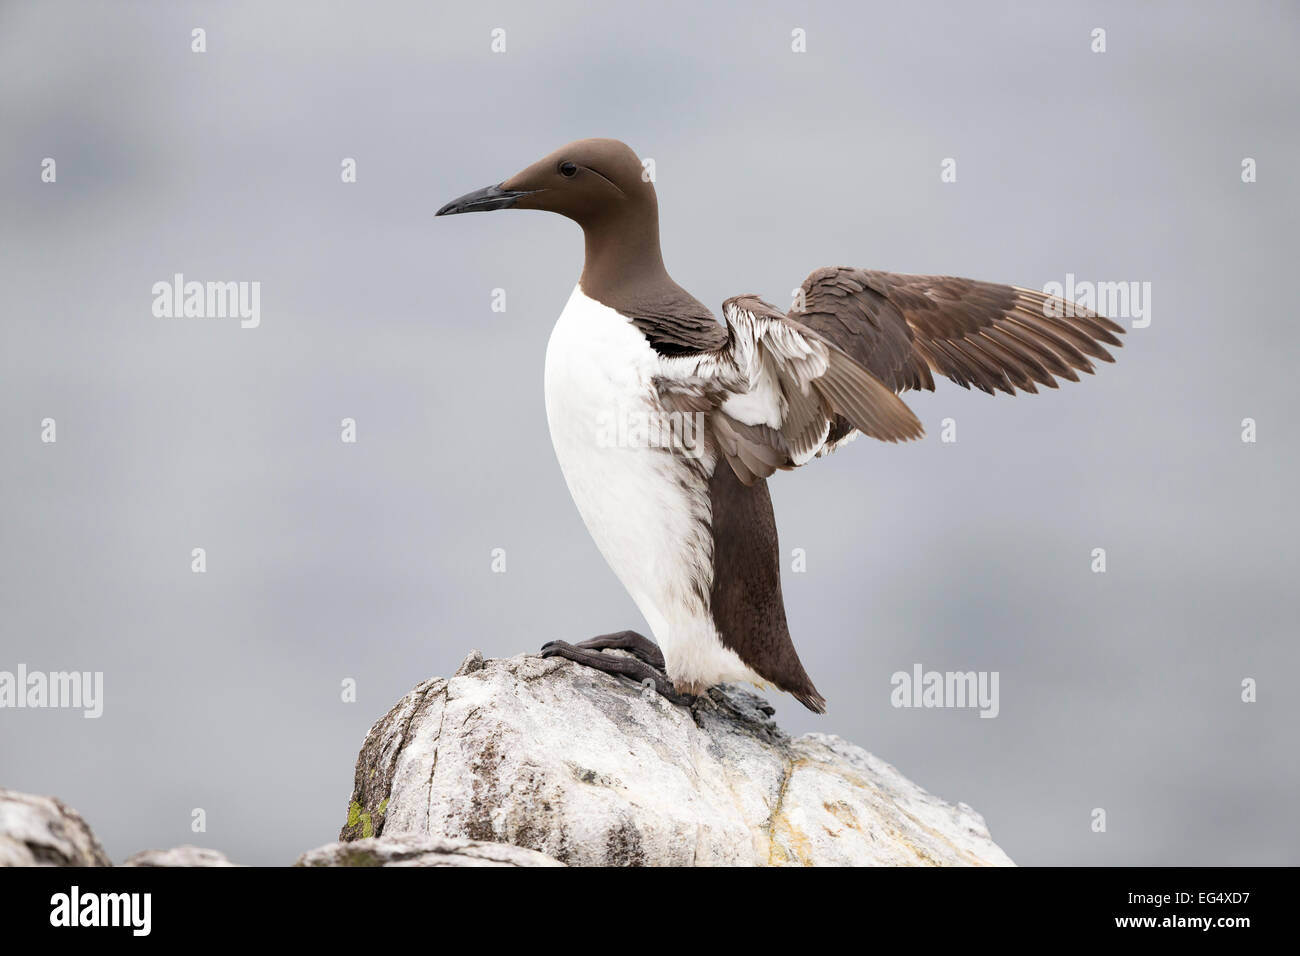 Guillemot (Uria aalge) standing on a cliff edge and flapping its wings; Isle of May, Scotland UK Stock Photo